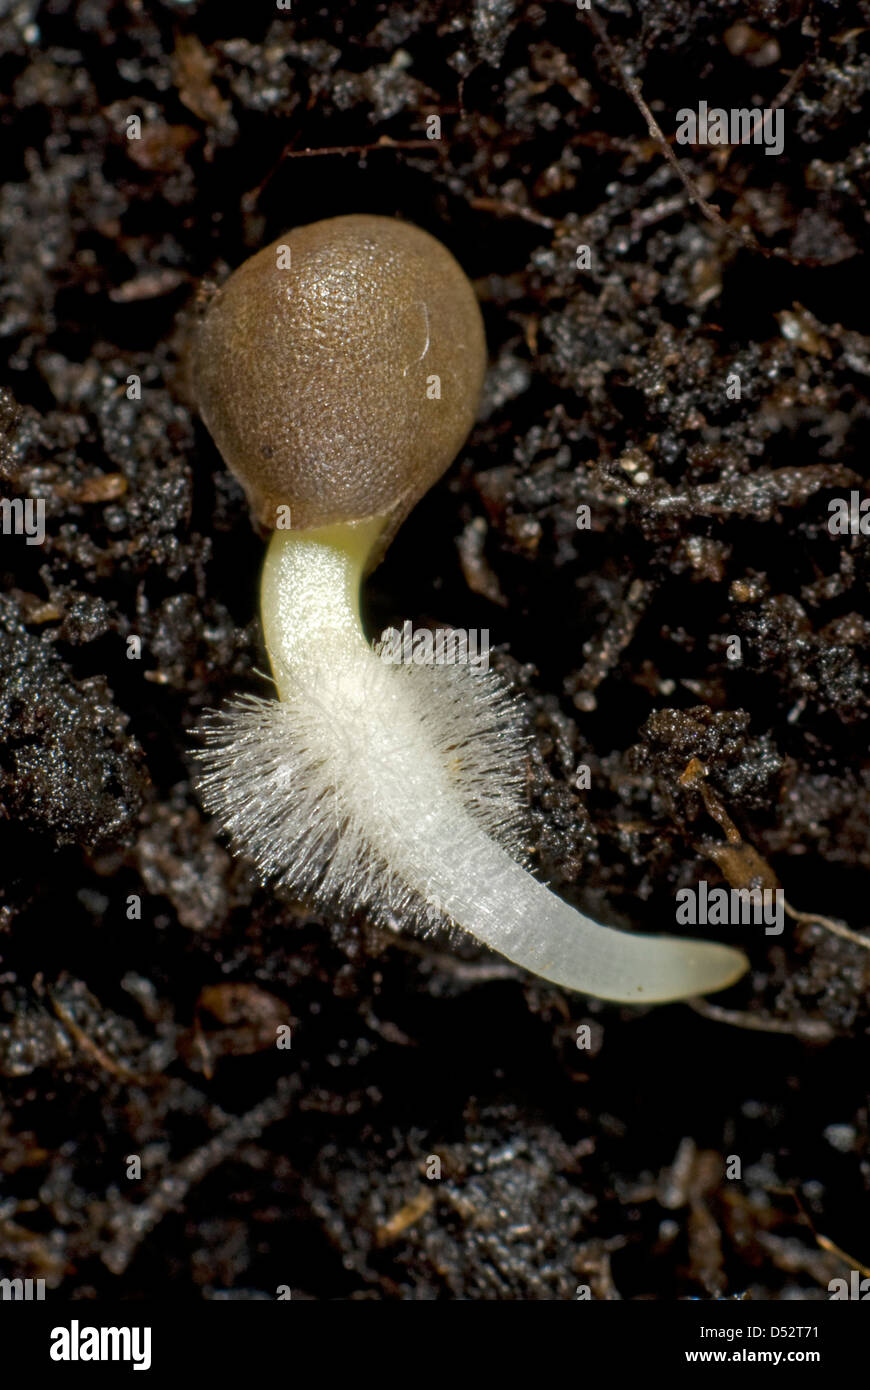 A germinating cabbage seed with root developing with root hairs on soil Stock Photo